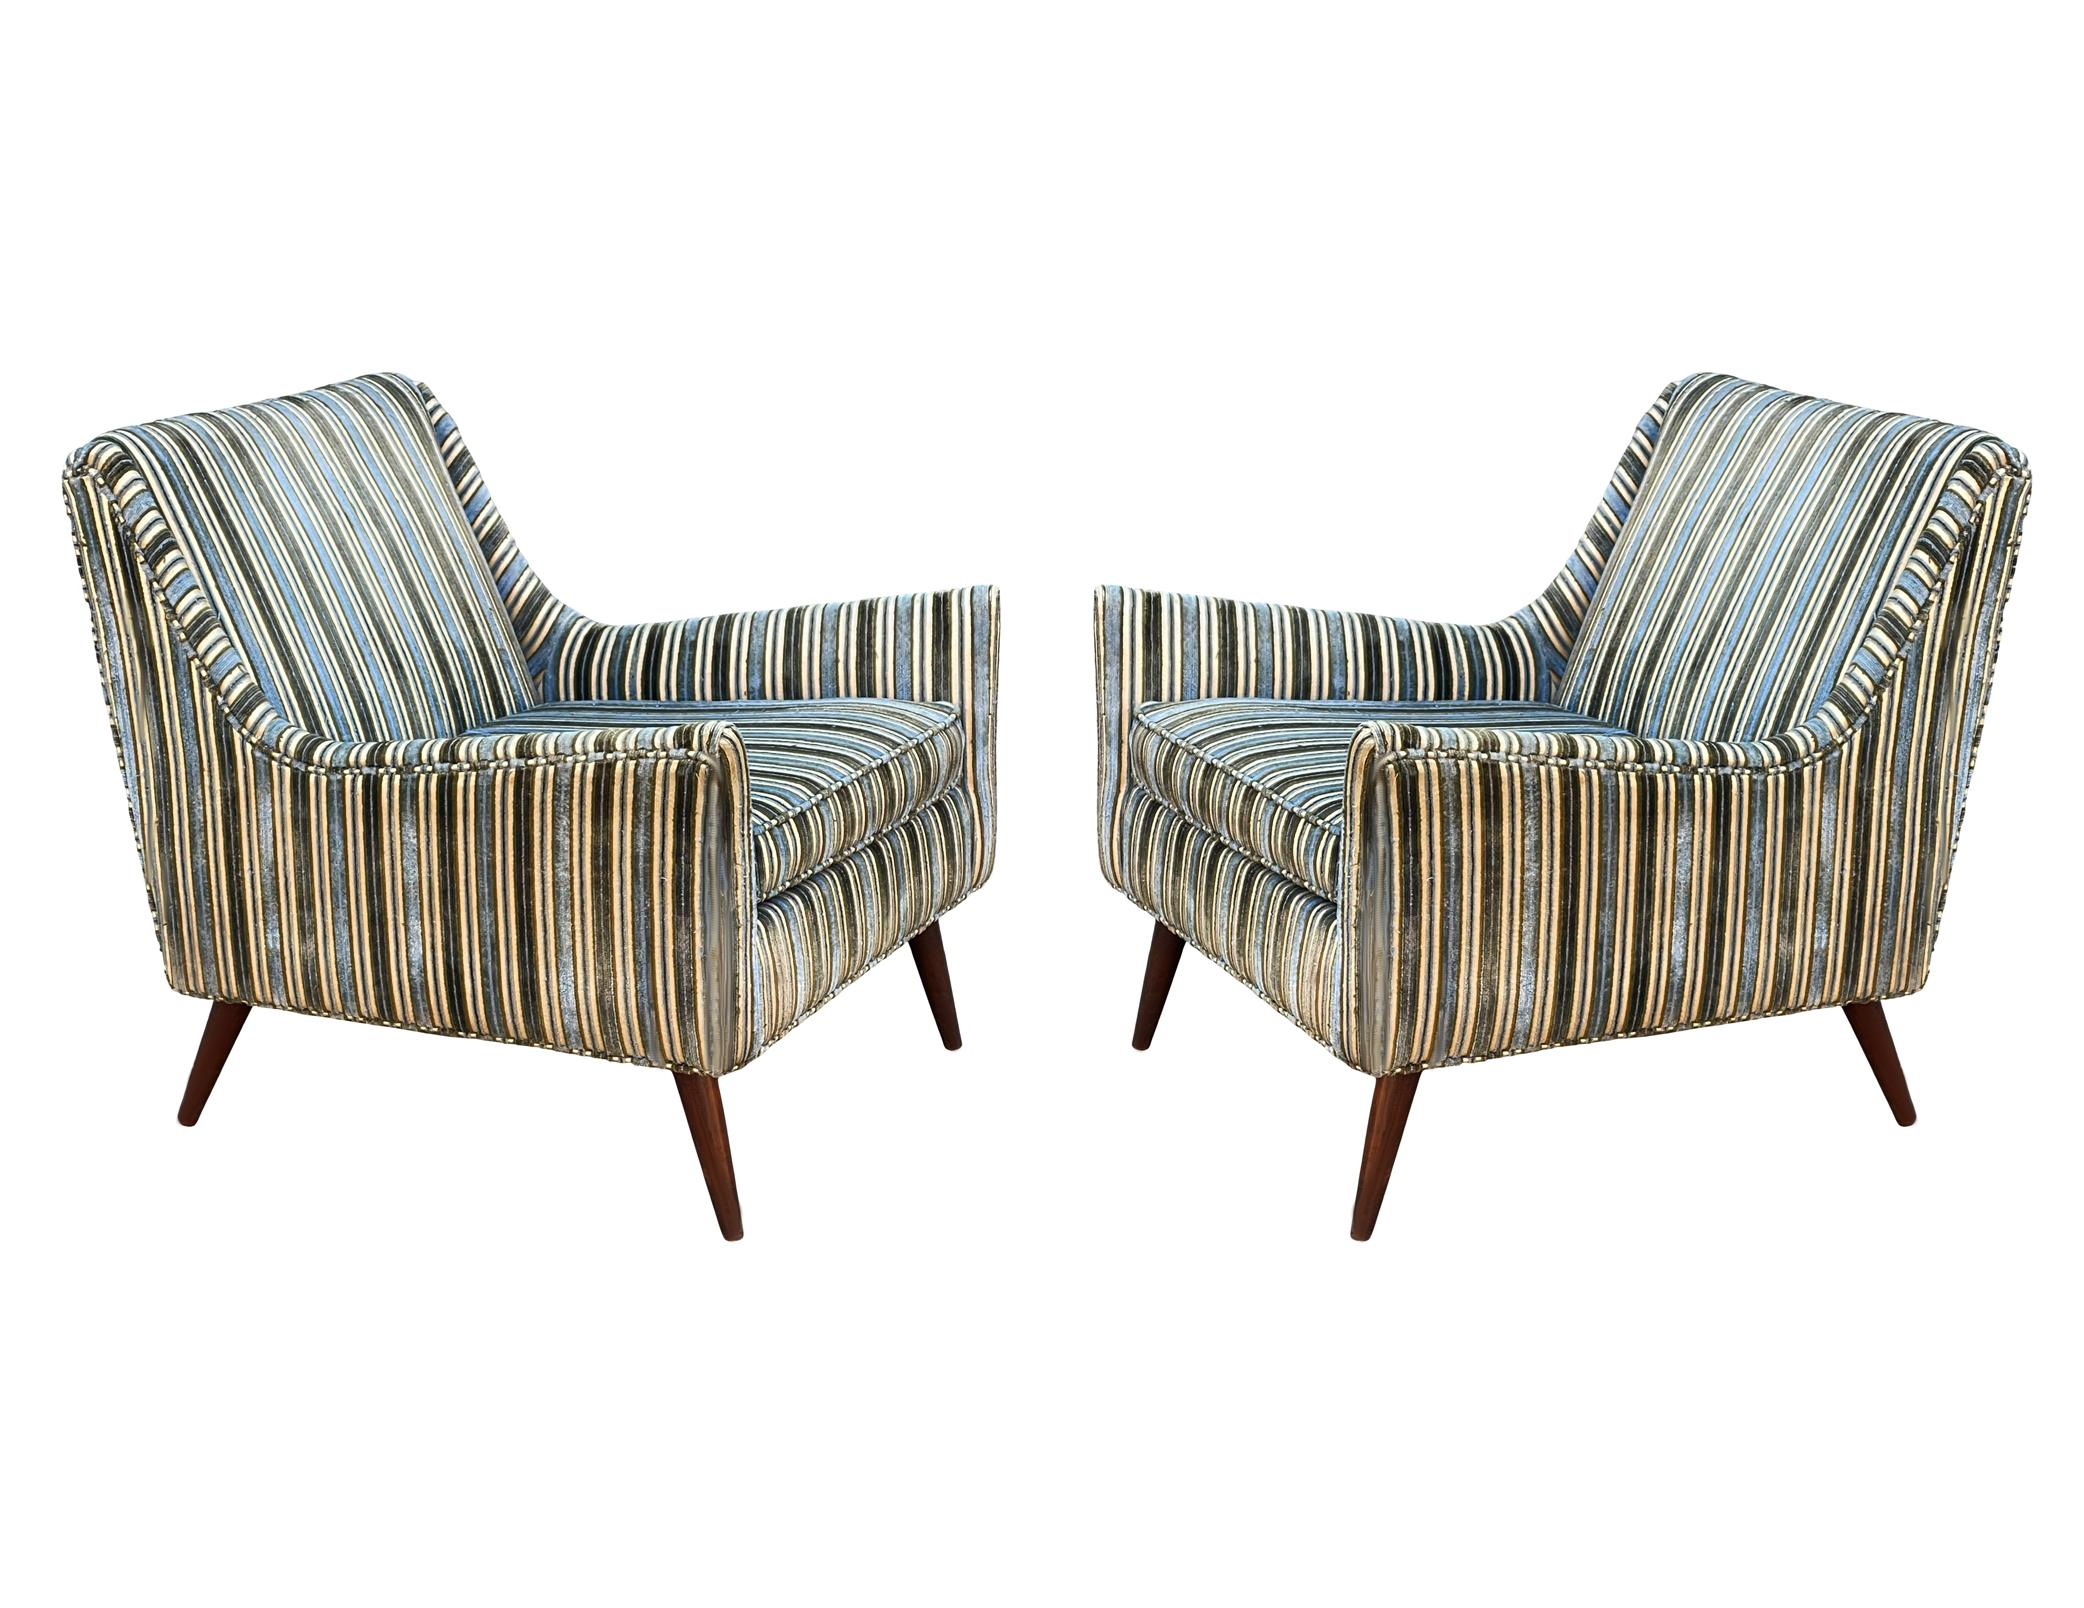 Pair of Mid-Century Modern Sculptural Lounge Chairs in the the of Harvey Probber In Fair Condition For Sale In Philadelphia, PA